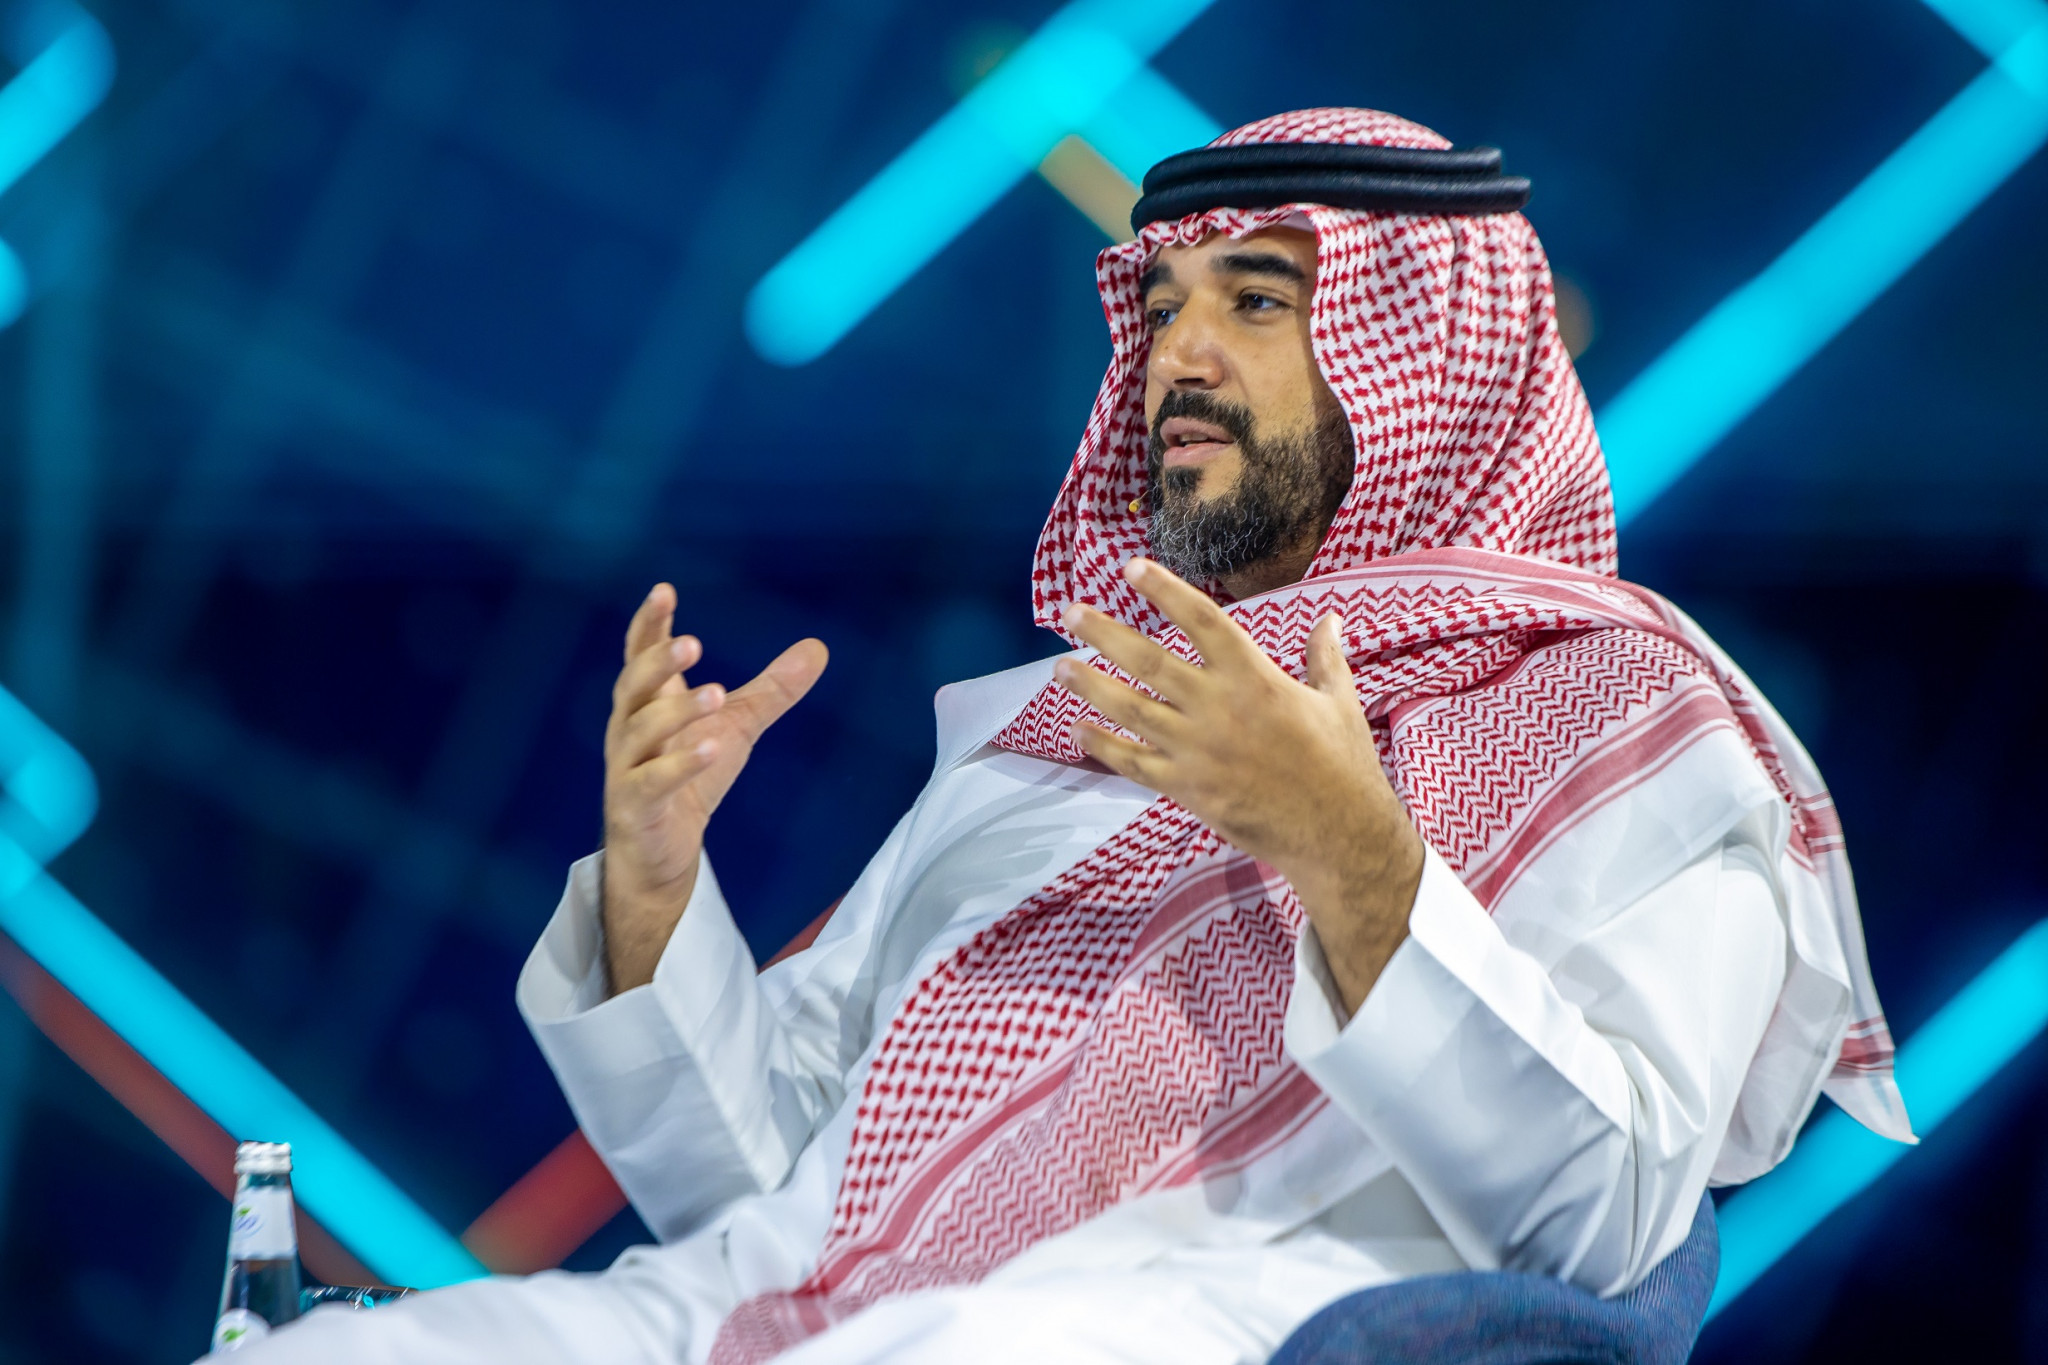 Saudi esports chief claims second Next World Forum will help shape industry's future